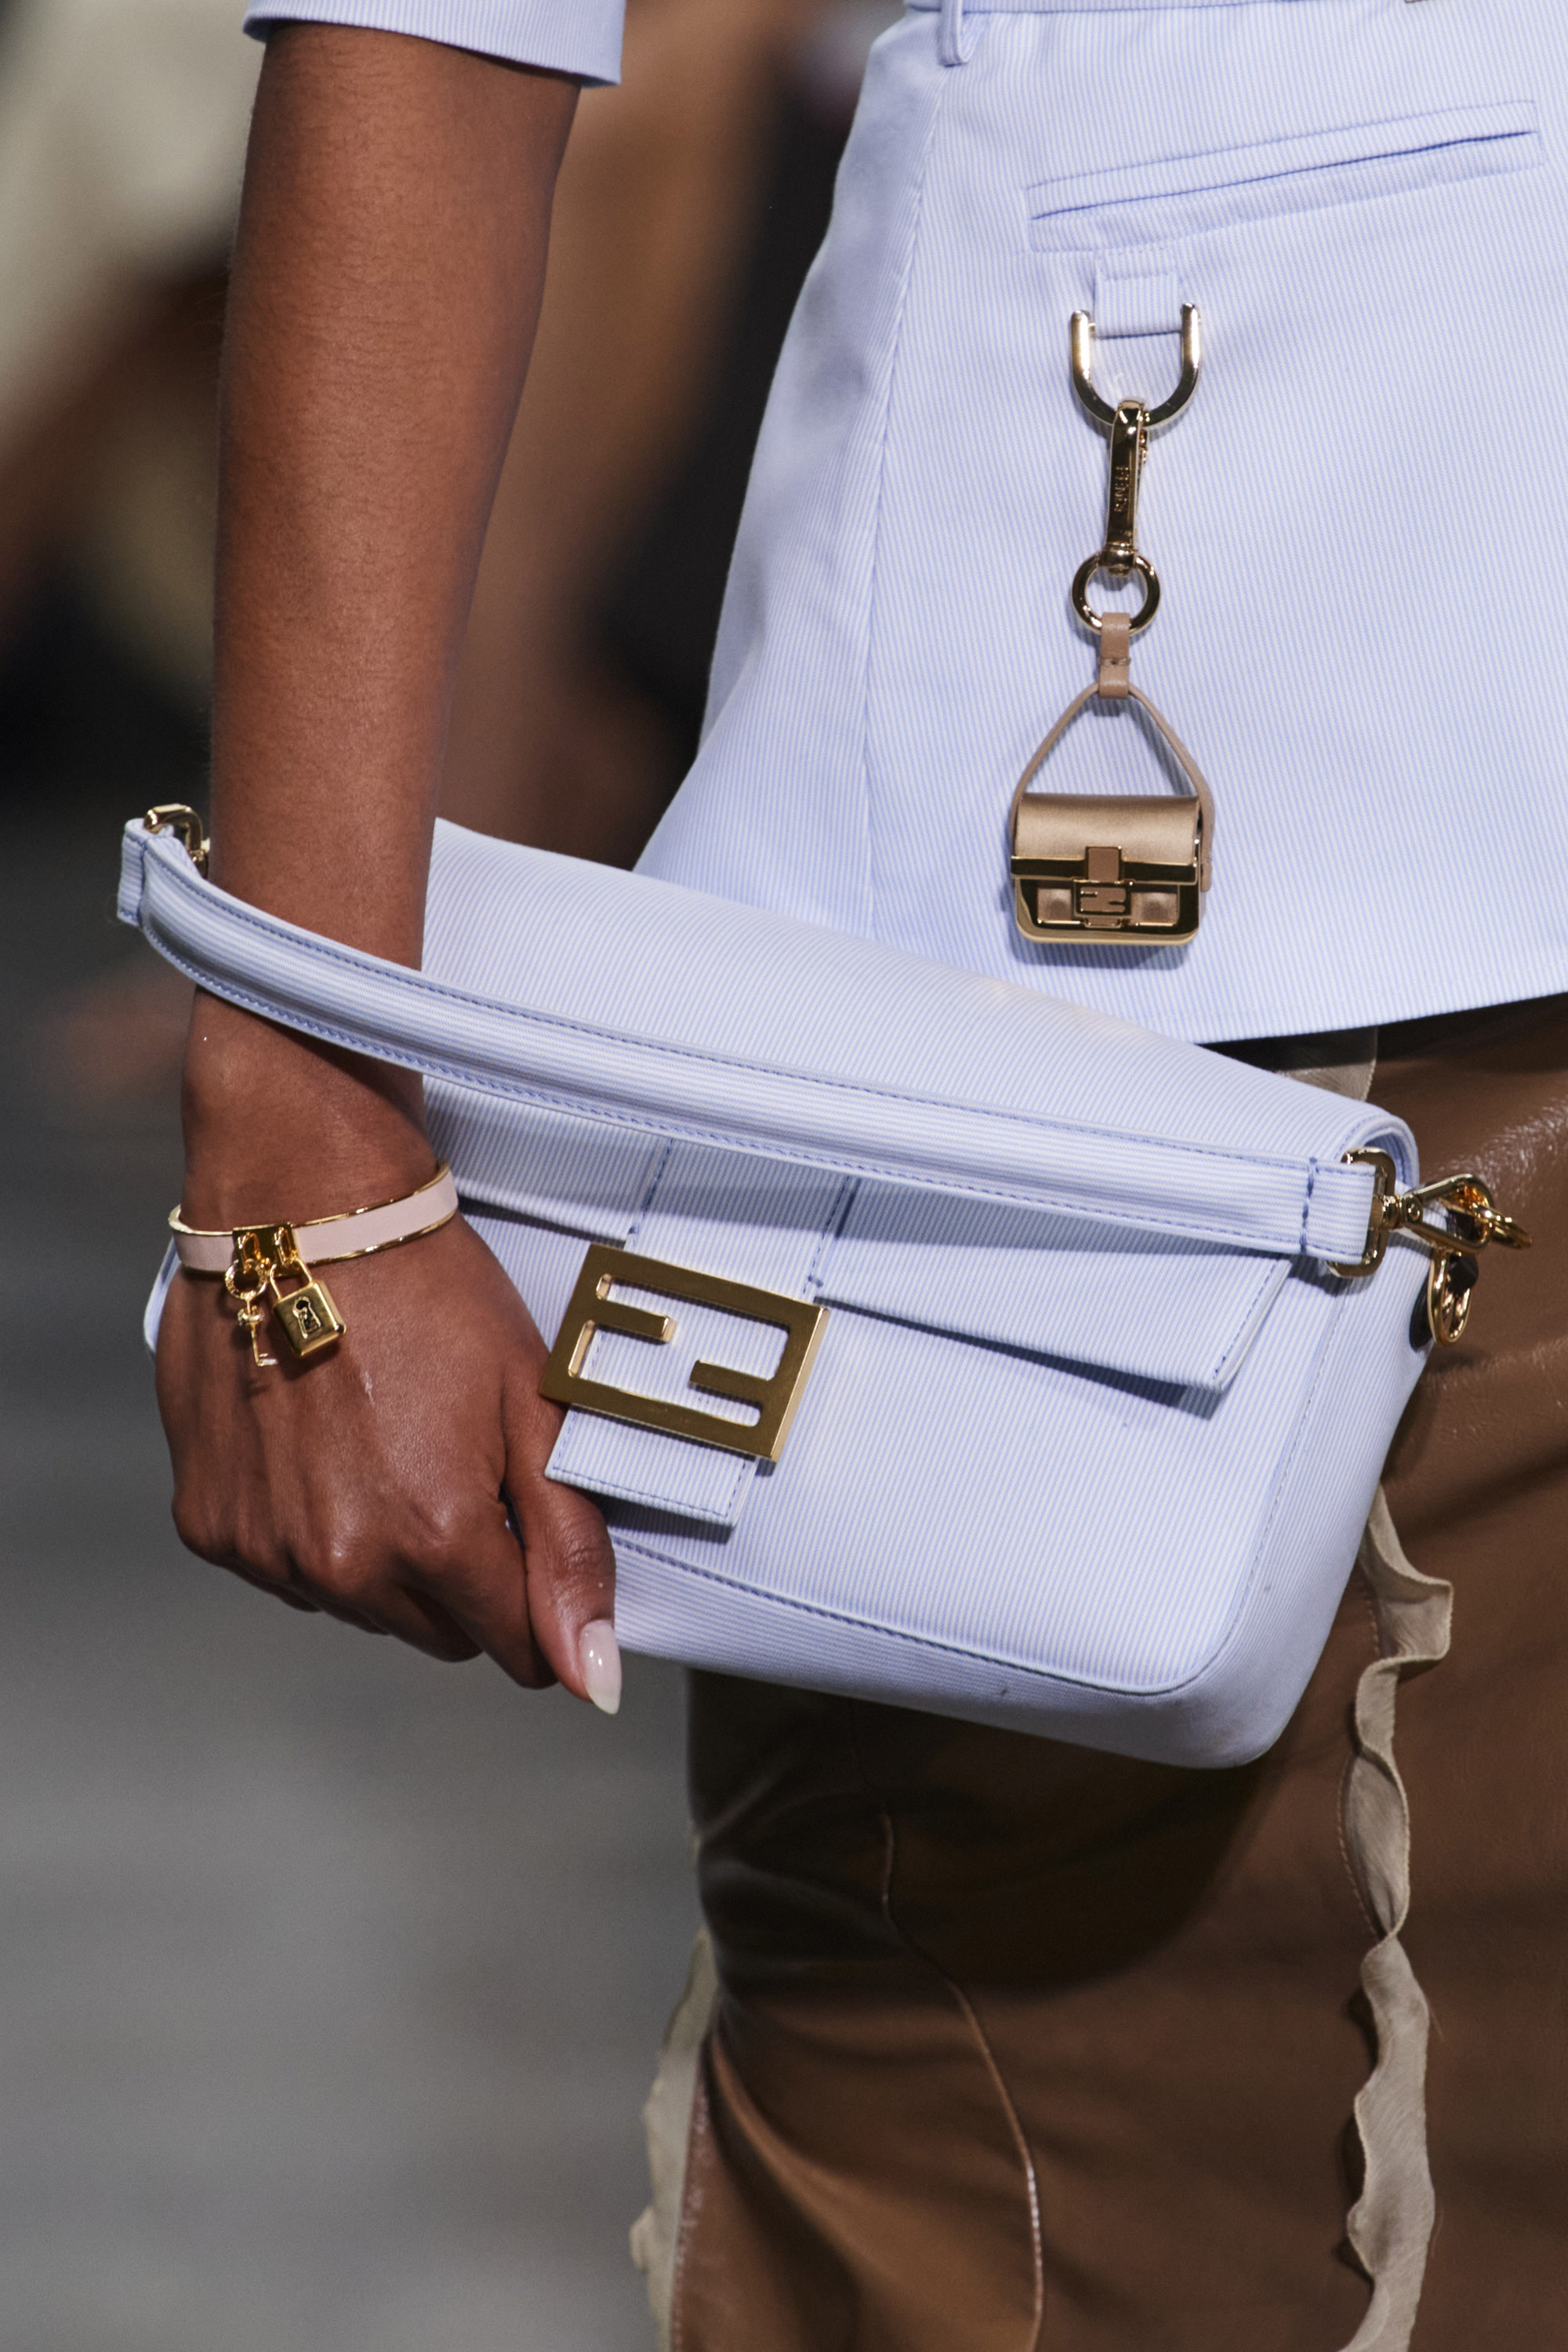 After Moschino, Fendi takes the internet by storm with baguette bag -  Lifestyle News